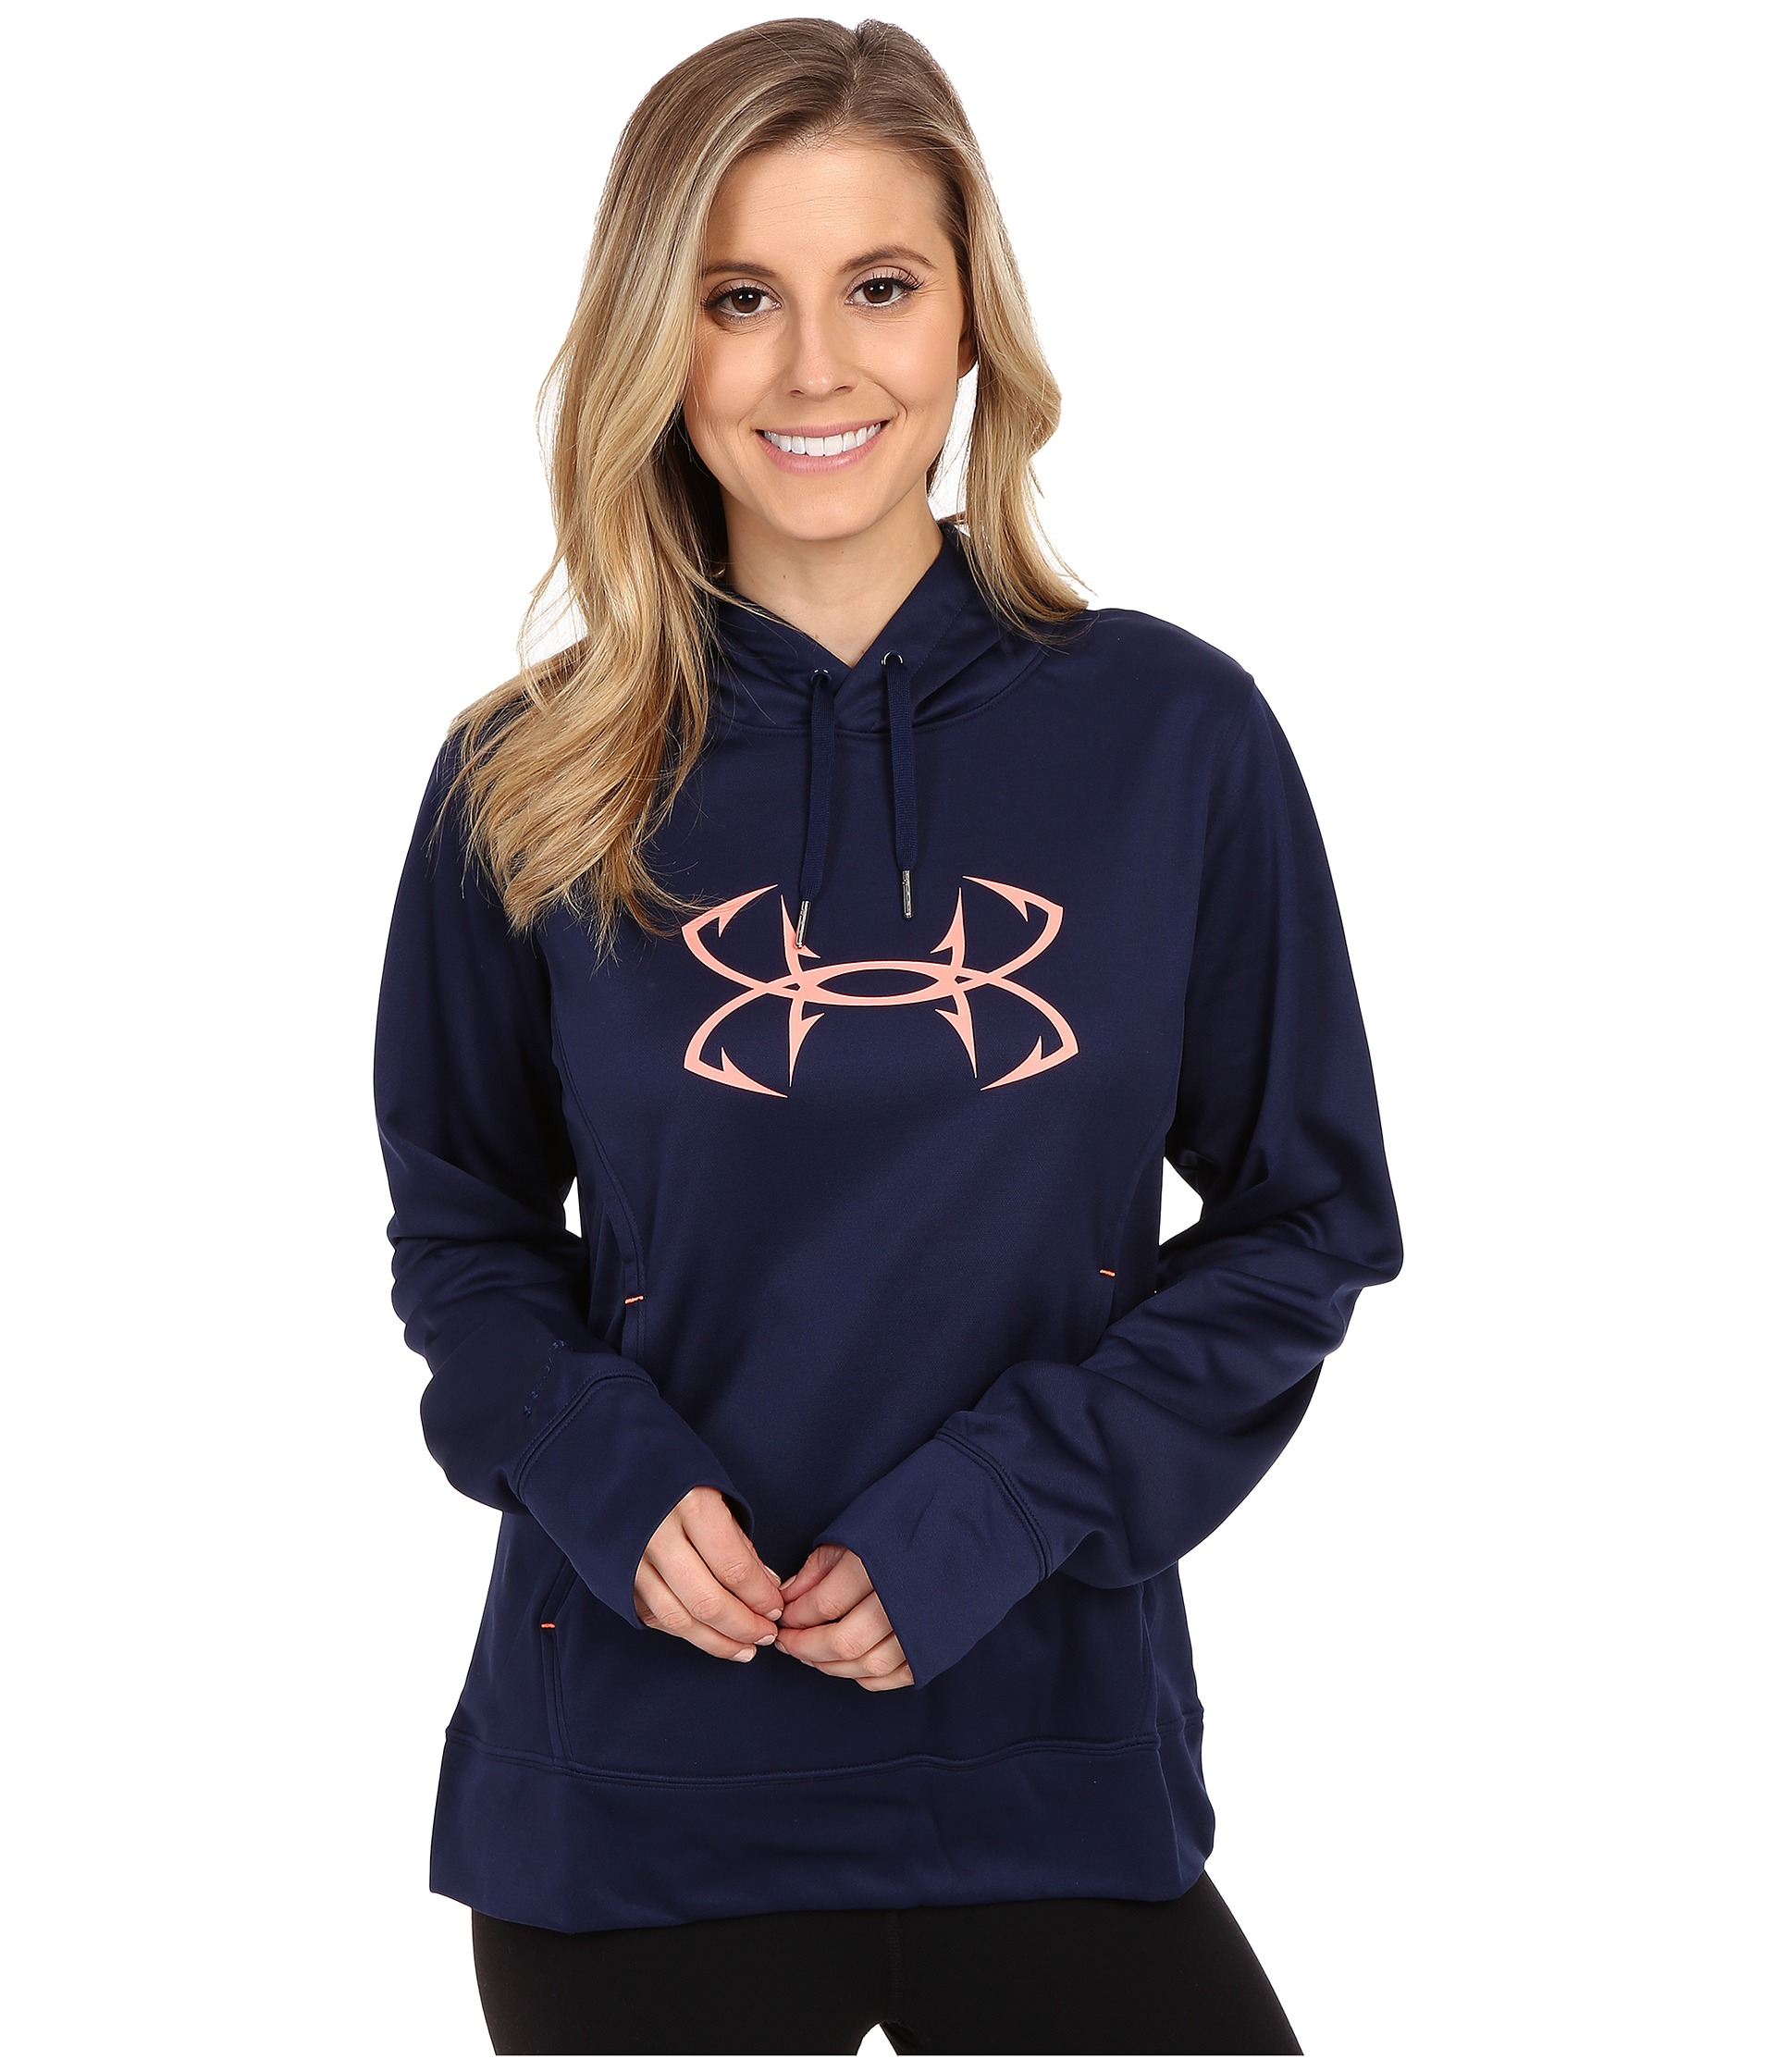 Lyst - Under armour Us Storm Fish Hook Hoodie in Blue